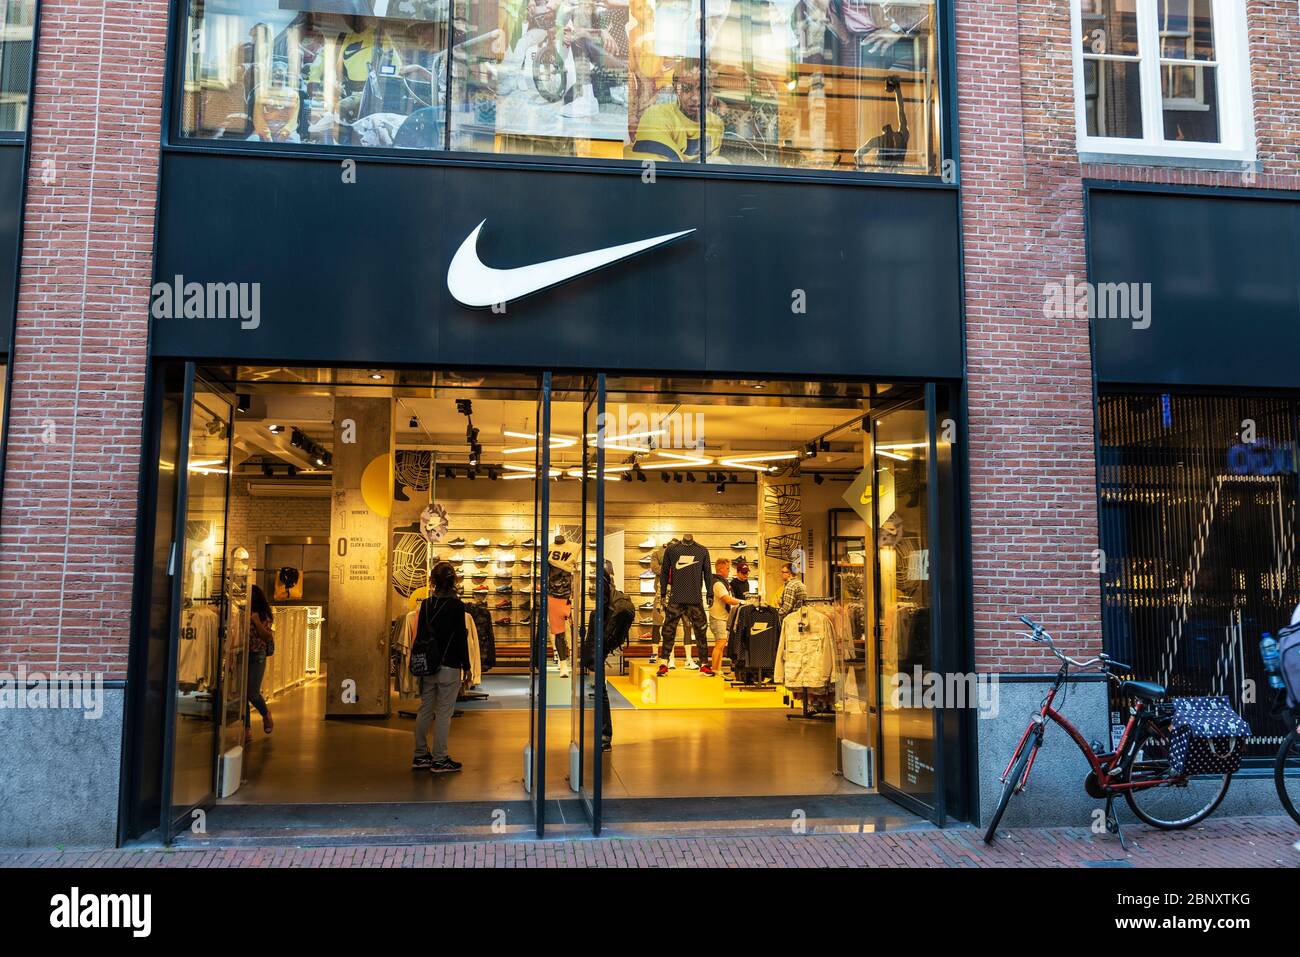 Amsterdam, Netherlands - September 9, 2018: Display of a Nike sports store  with people around in Amsterdam, Netherlands Stock Photo - Alamy